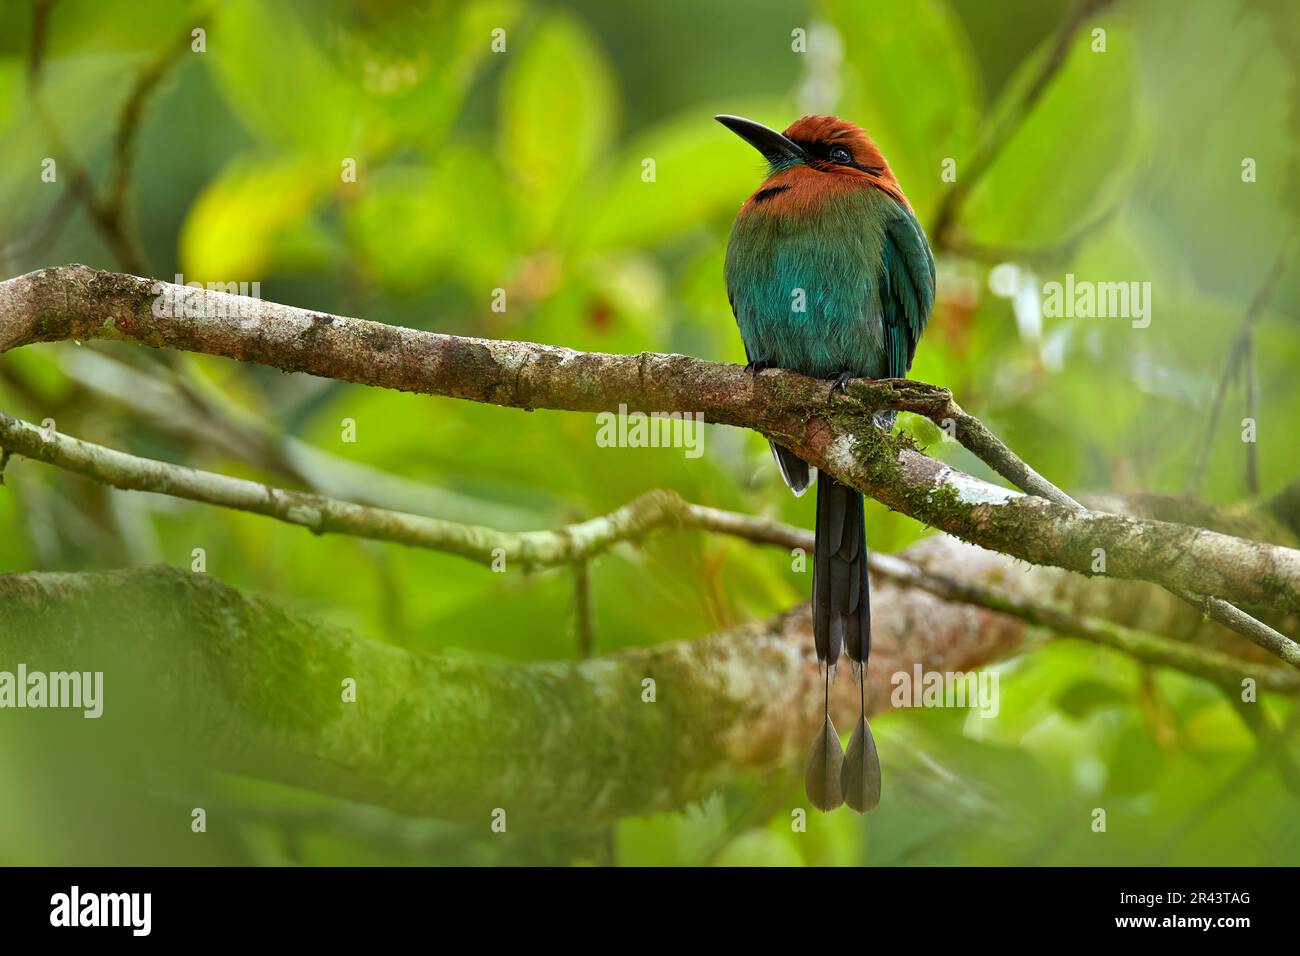 Broad-billed Motmot, Electron platyrhynchum, portrait of nice big bird in wild nature, beautiful coloured forest background, art view, Costa Rica. Stock Photo